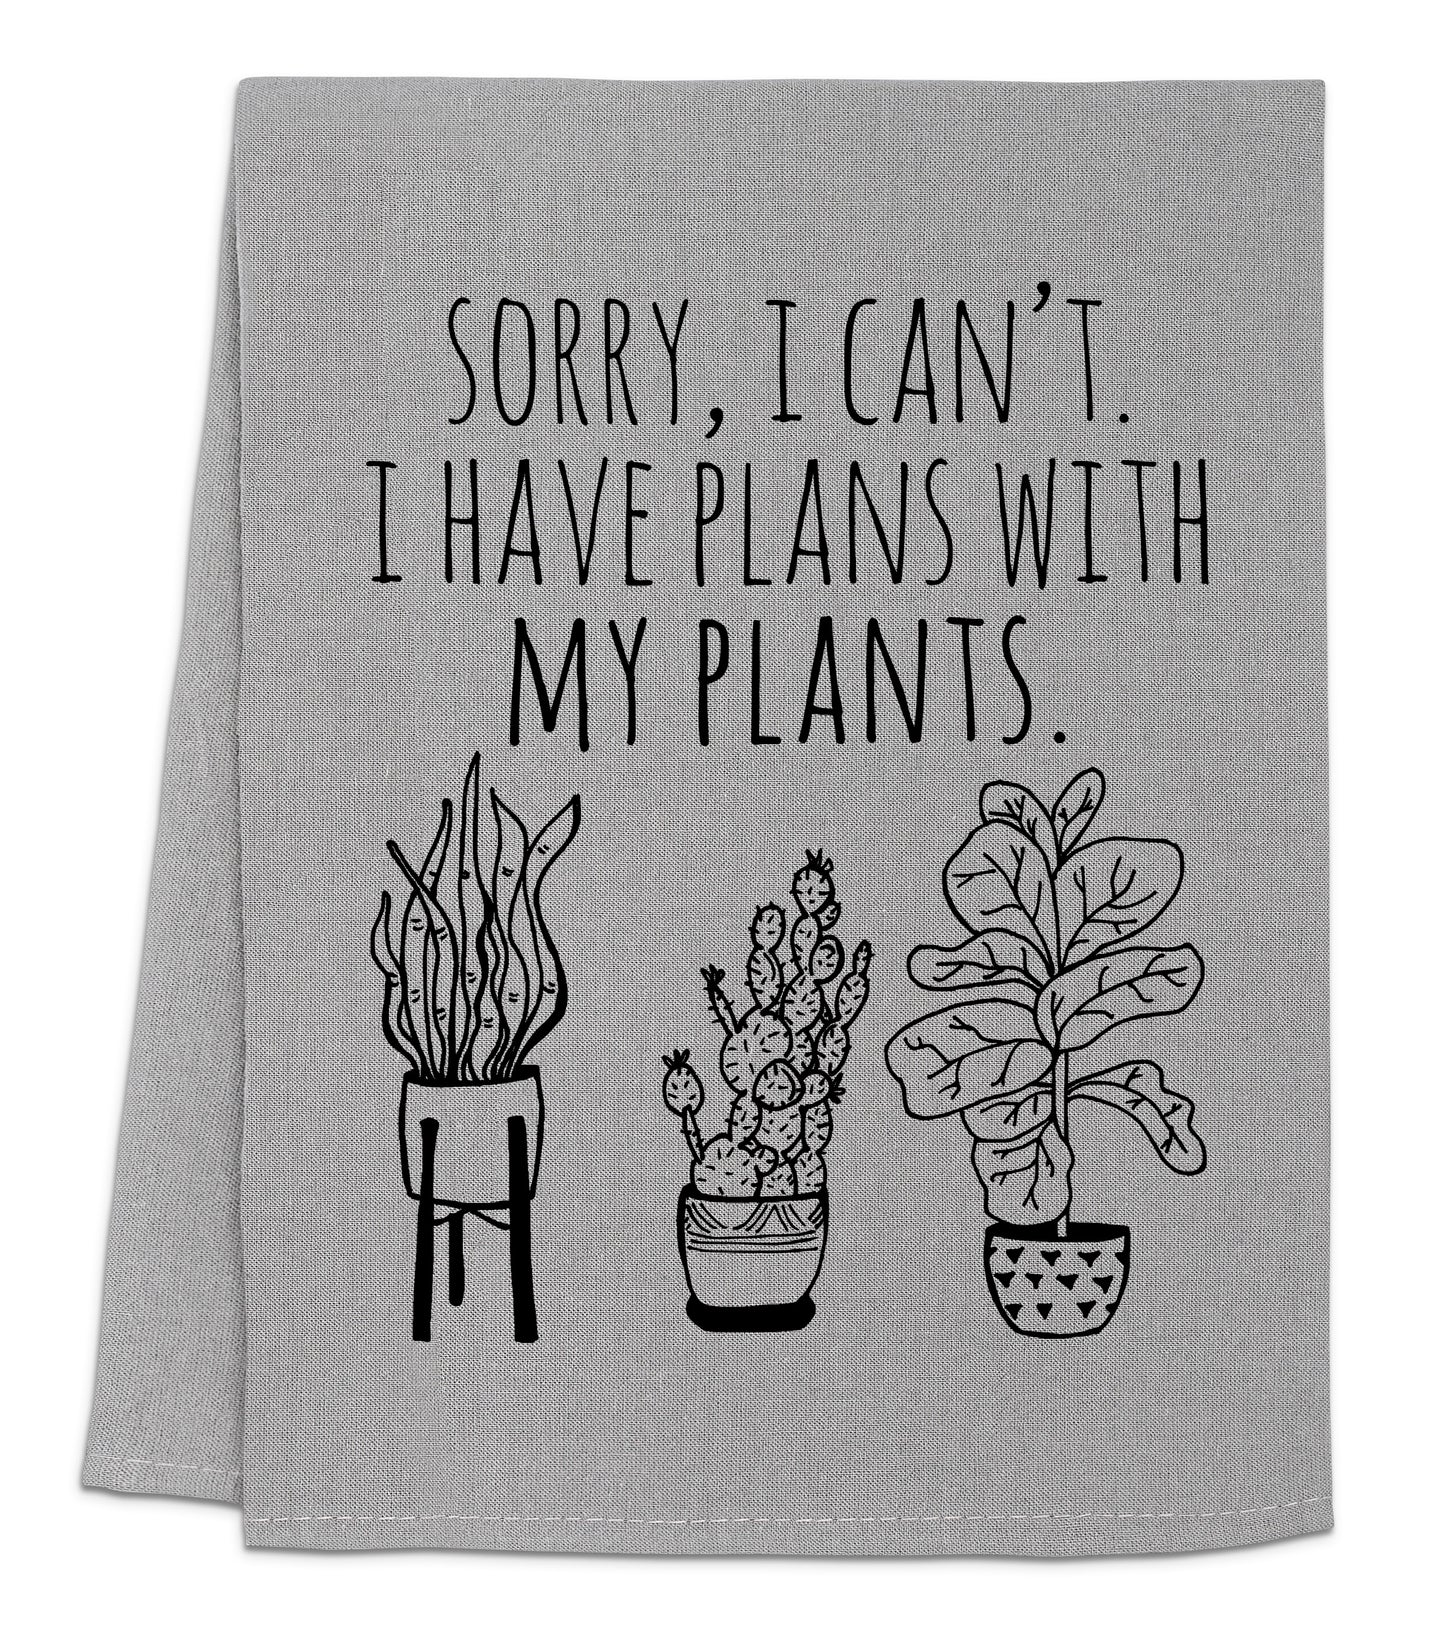 a towel that says sorry i can't i have plans with my plants